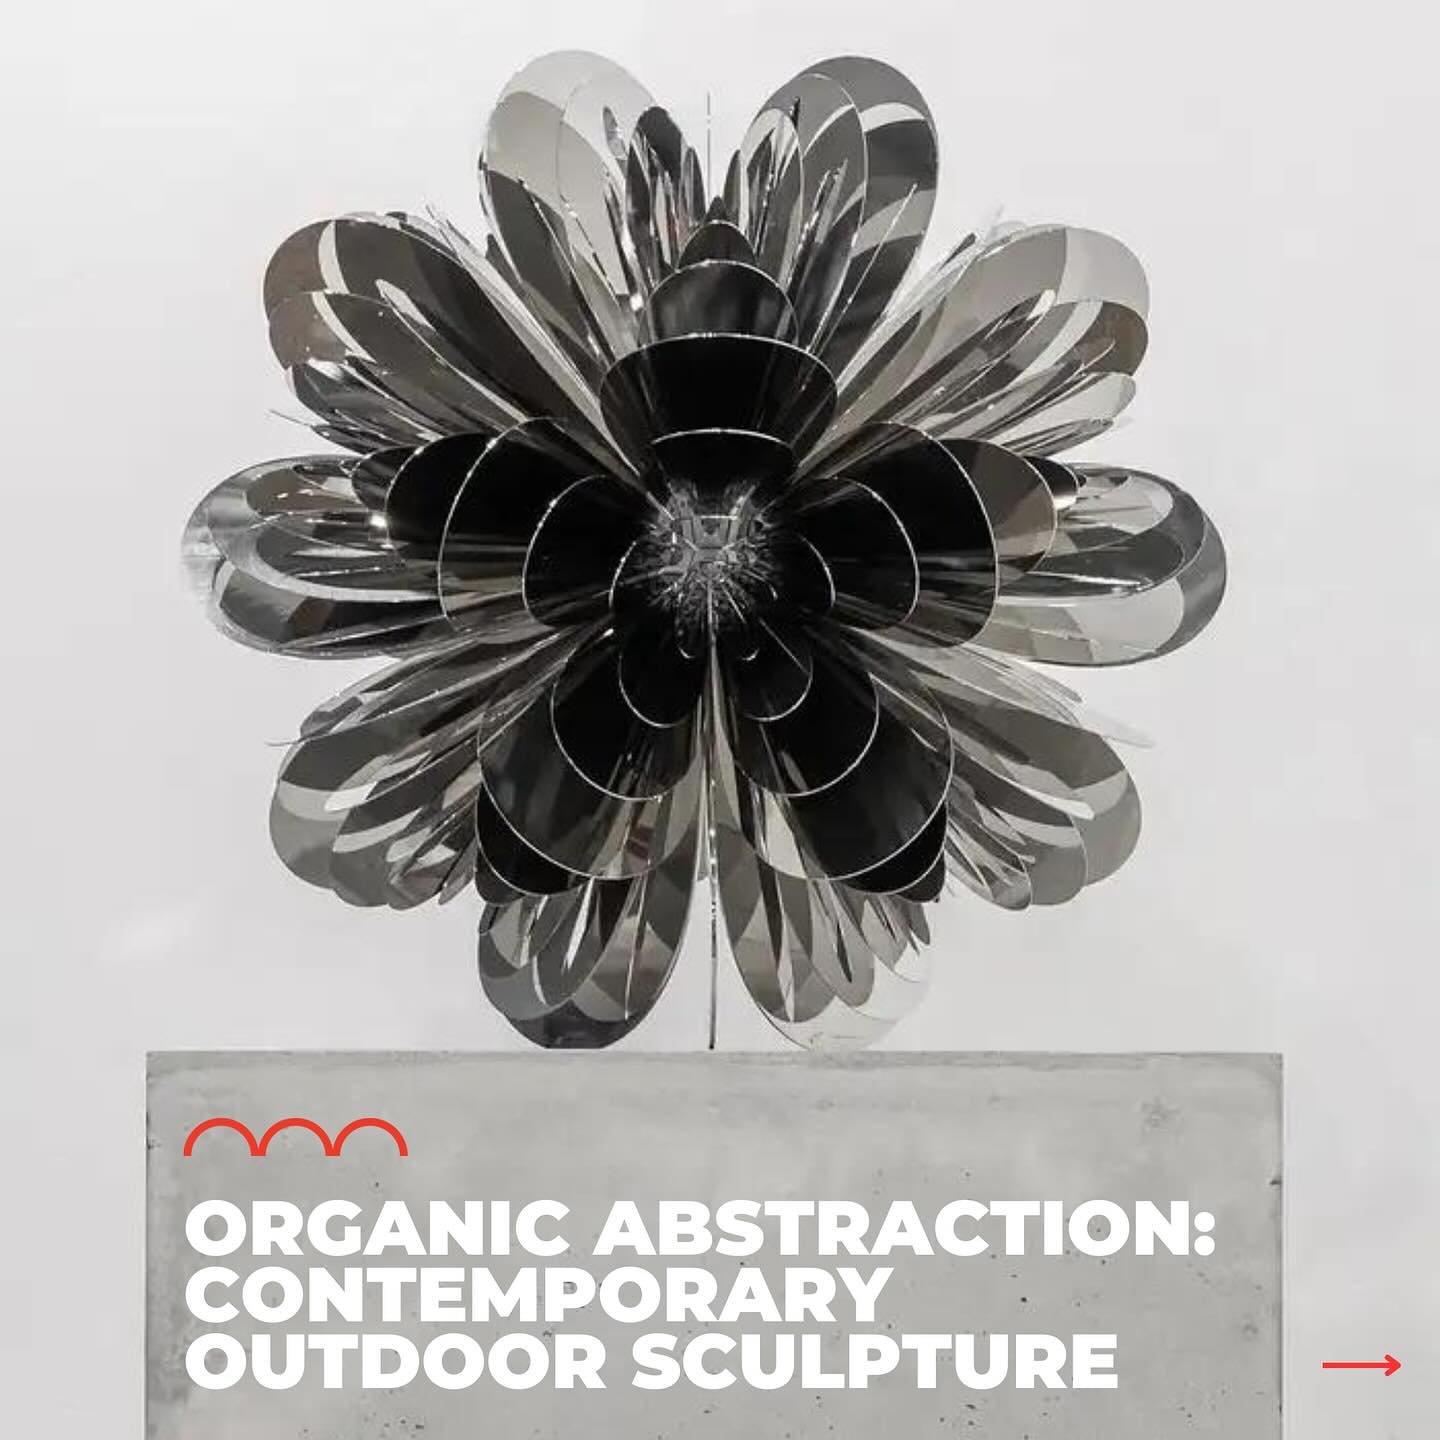 Immerse yourself in the world of &ldquo;Organic Abstraction&rdquo; at SAC, OPEN NOW, where art intimately connects with nature. This unique exhibition, curated by Cheryl Sokolow of C Fine Art, showcases the innovative works of John Van Alstine, Kevin